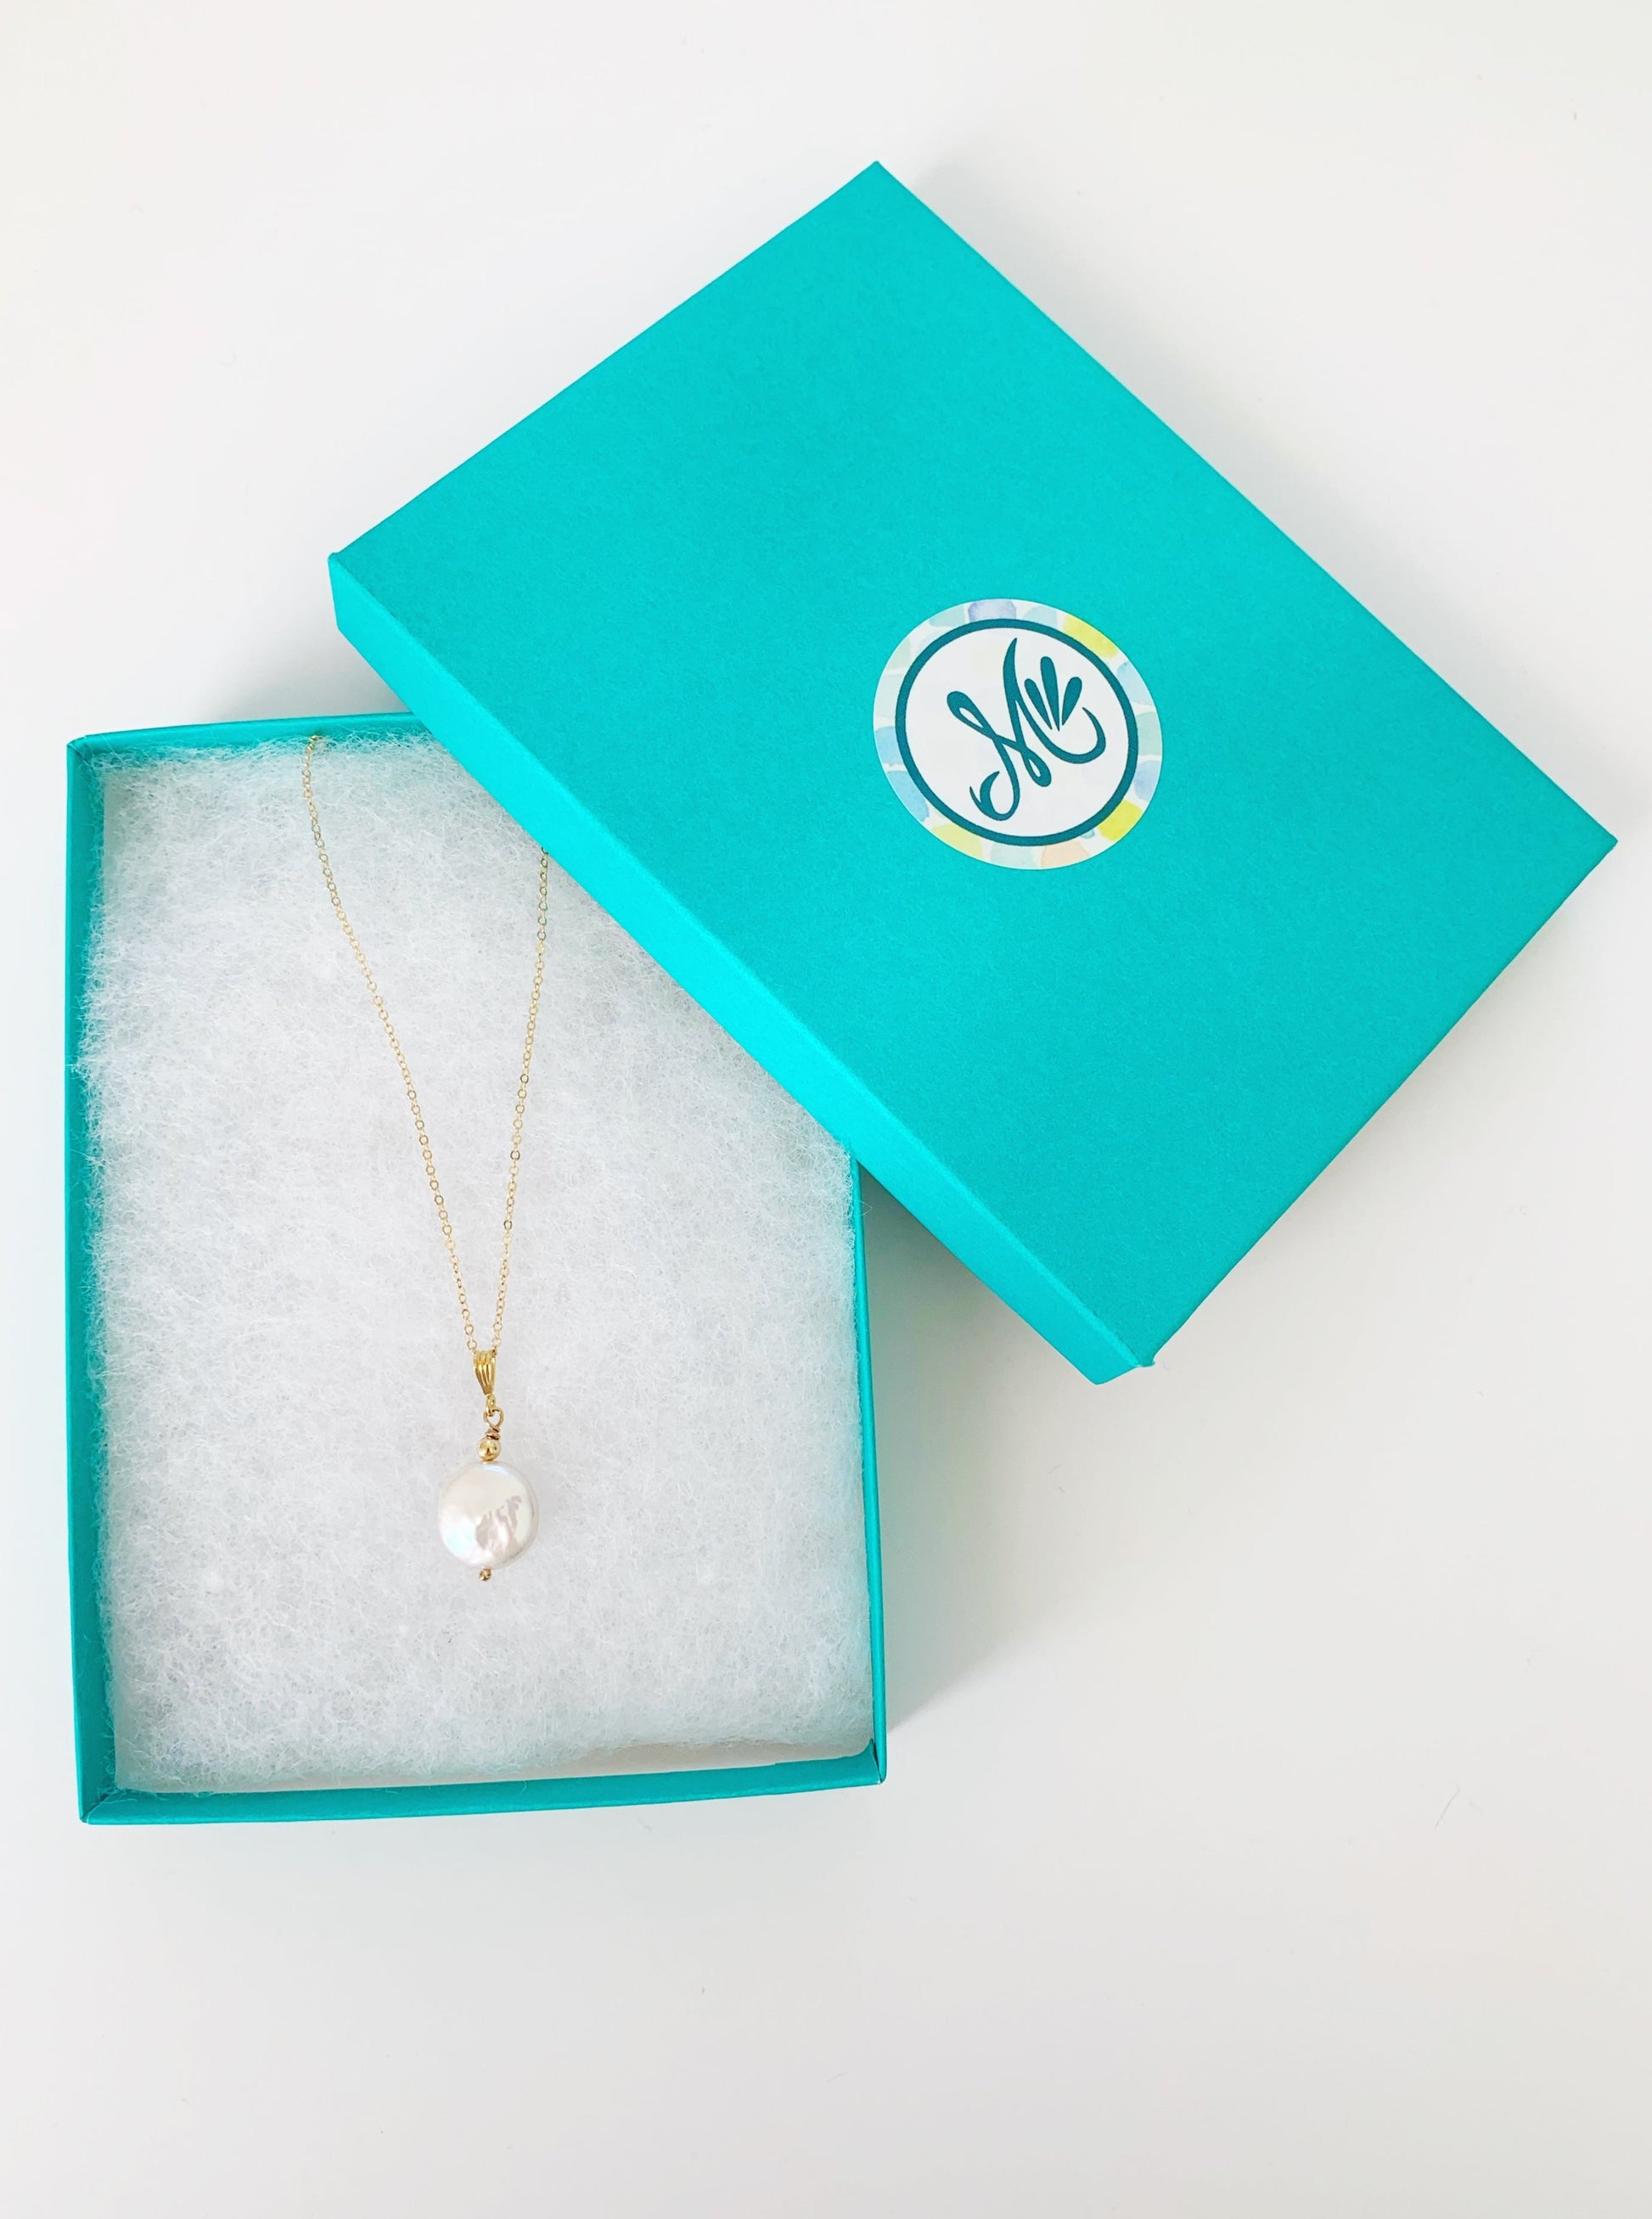 Newport Gala necklace in 14k gold filled is a large freshwater coin pearl pendant. this one is photographed in a teal gift box on a white surface